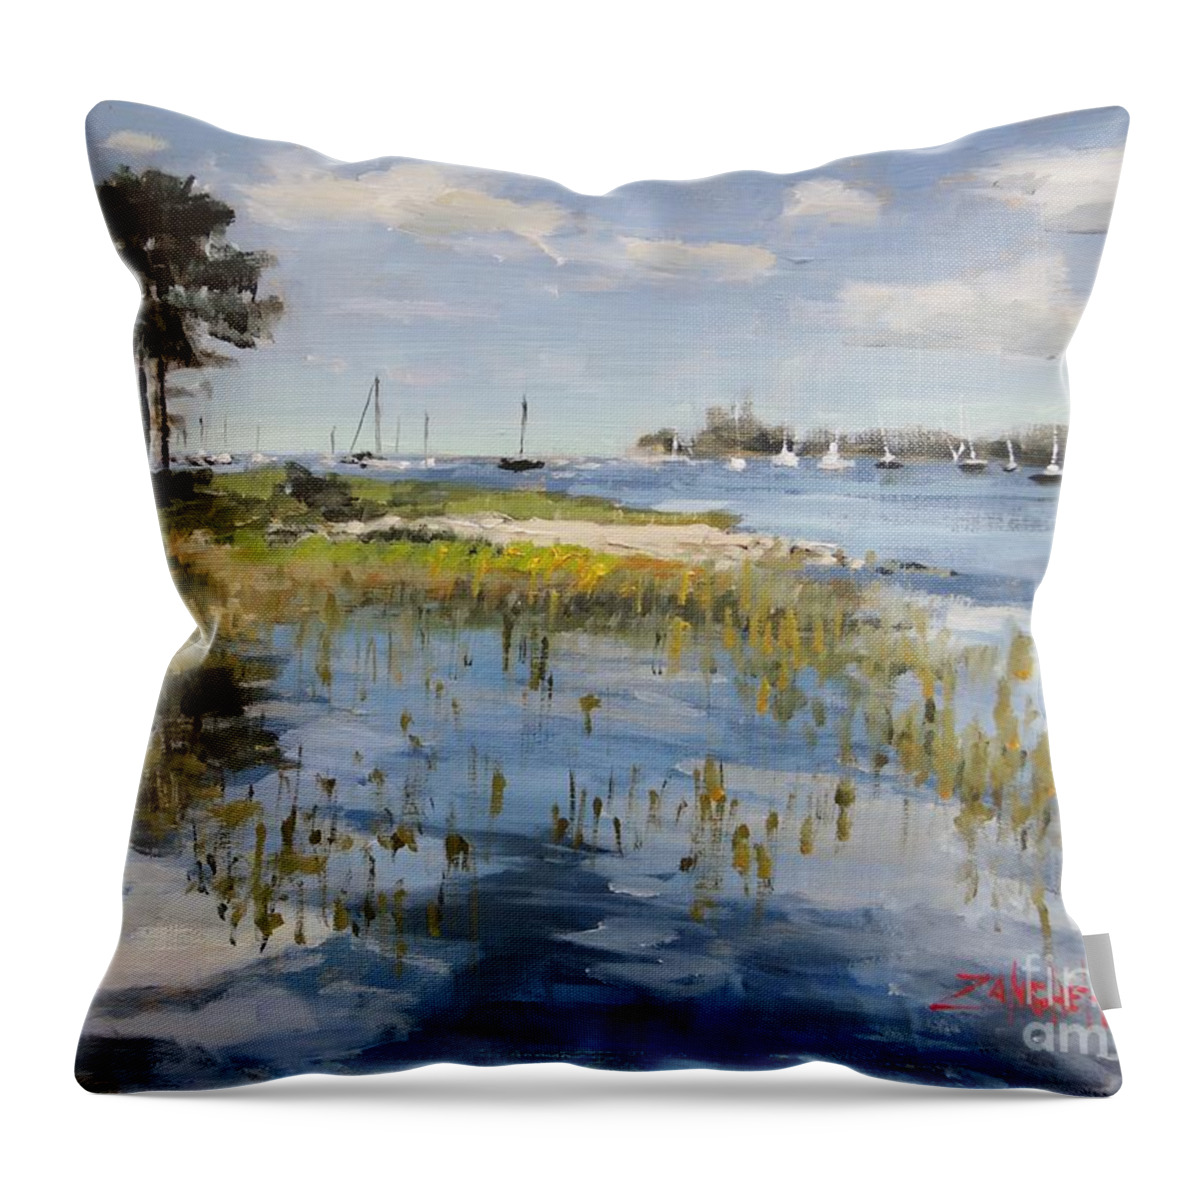 New Hampshire Throw Pillow featuring the painting Manchester by the Sea by Laura Lee Zanghetti